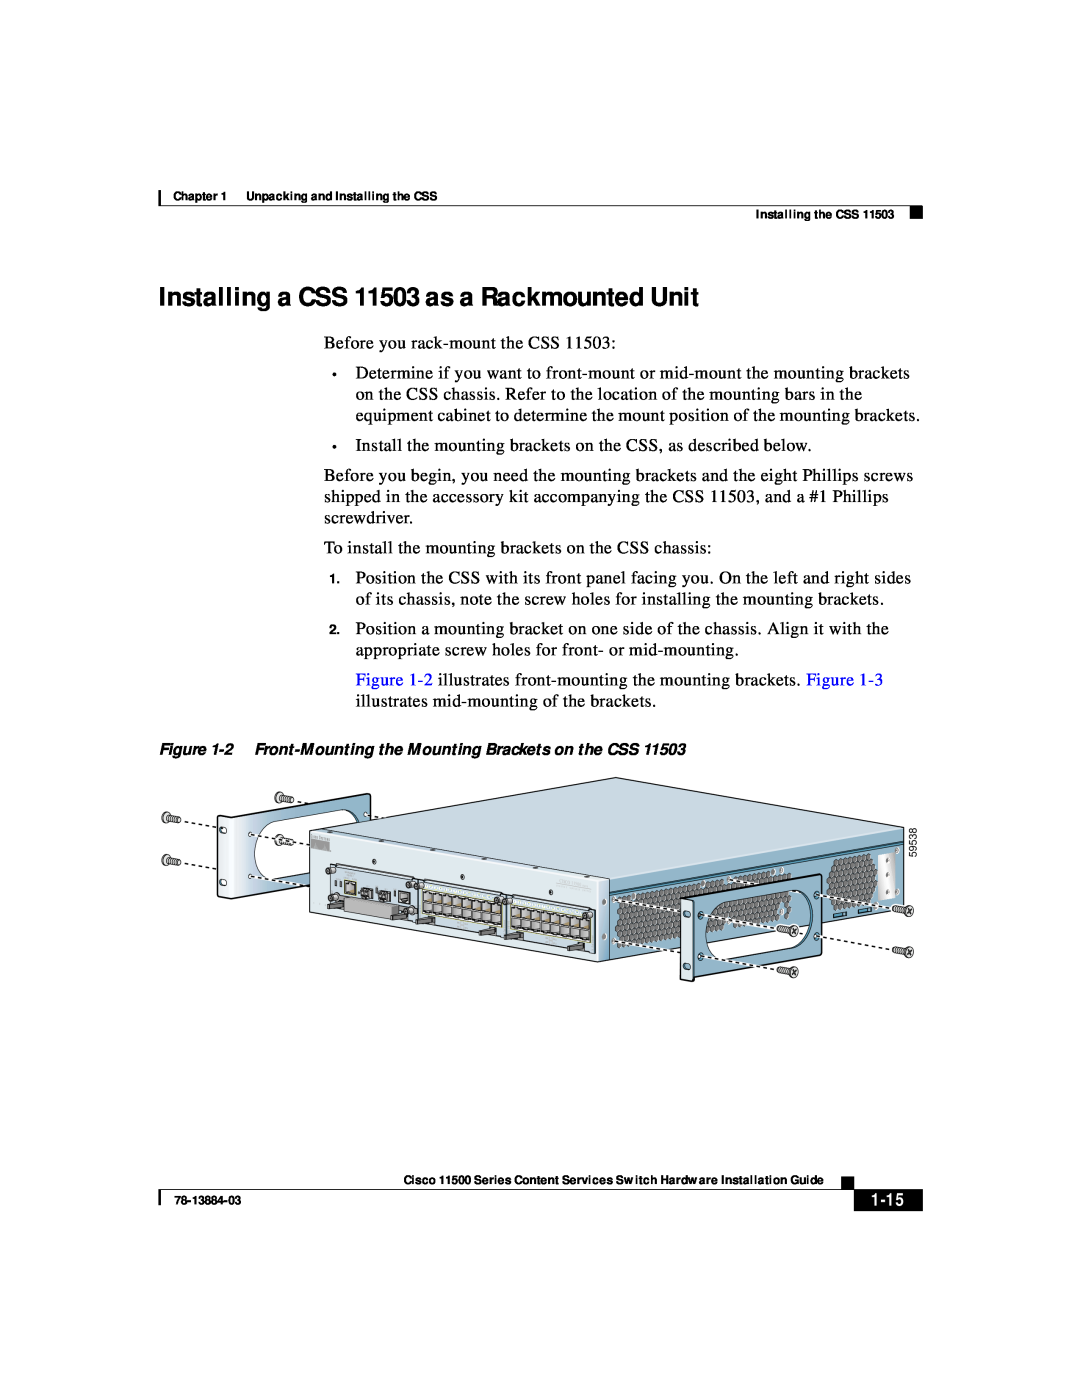 Cisco Systems 11500 Series manual Installing a CSS 11503 as a Rackmounted Unit, 1-15 